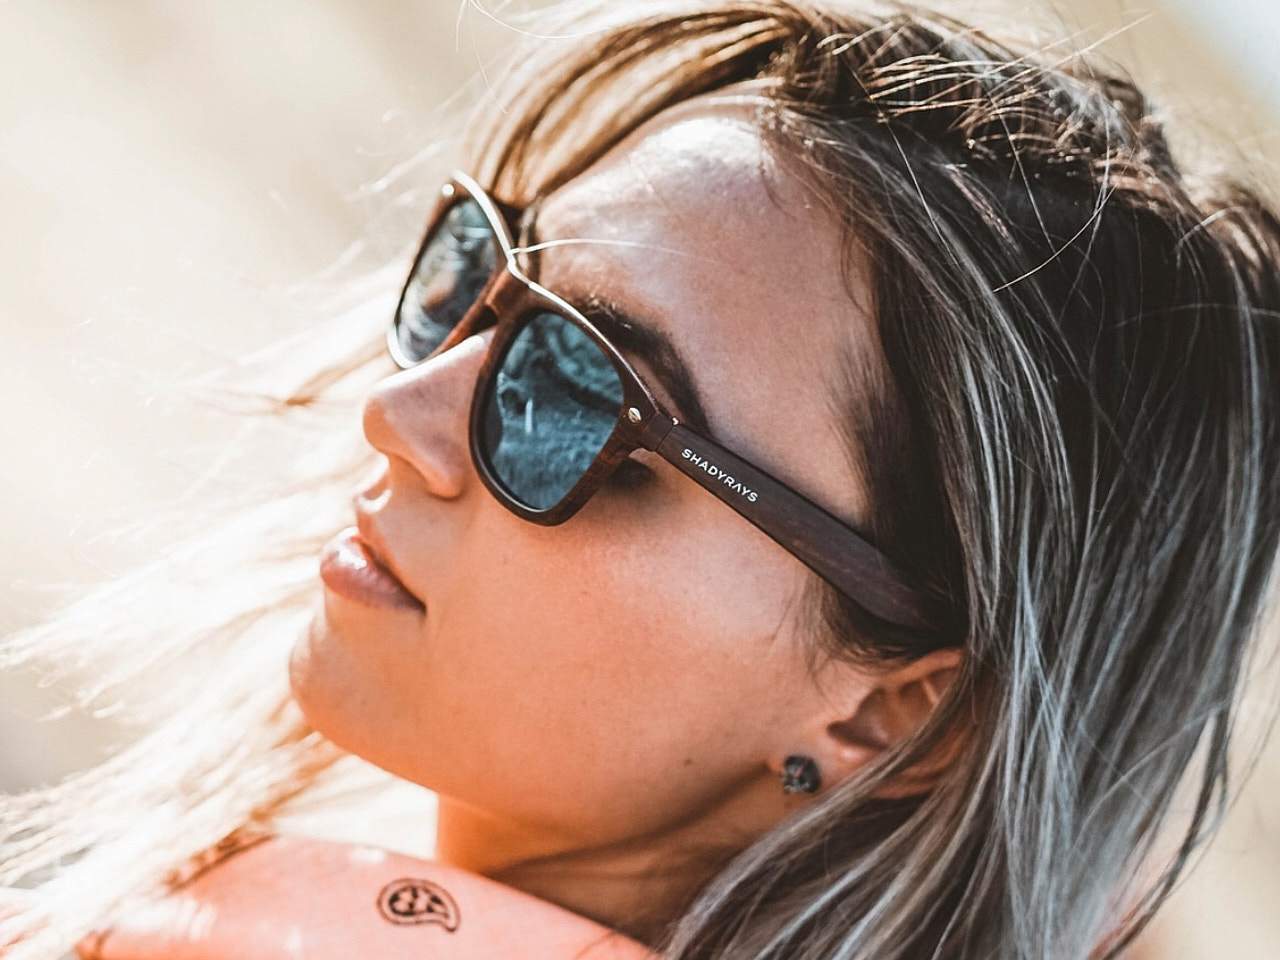 Classic Timber - Black Ocean Polarized Sunglasses | Timber Brown Sunglasses | Best Christmas Gifts | Gifts for the Holidays | Unique Gifts for Friends